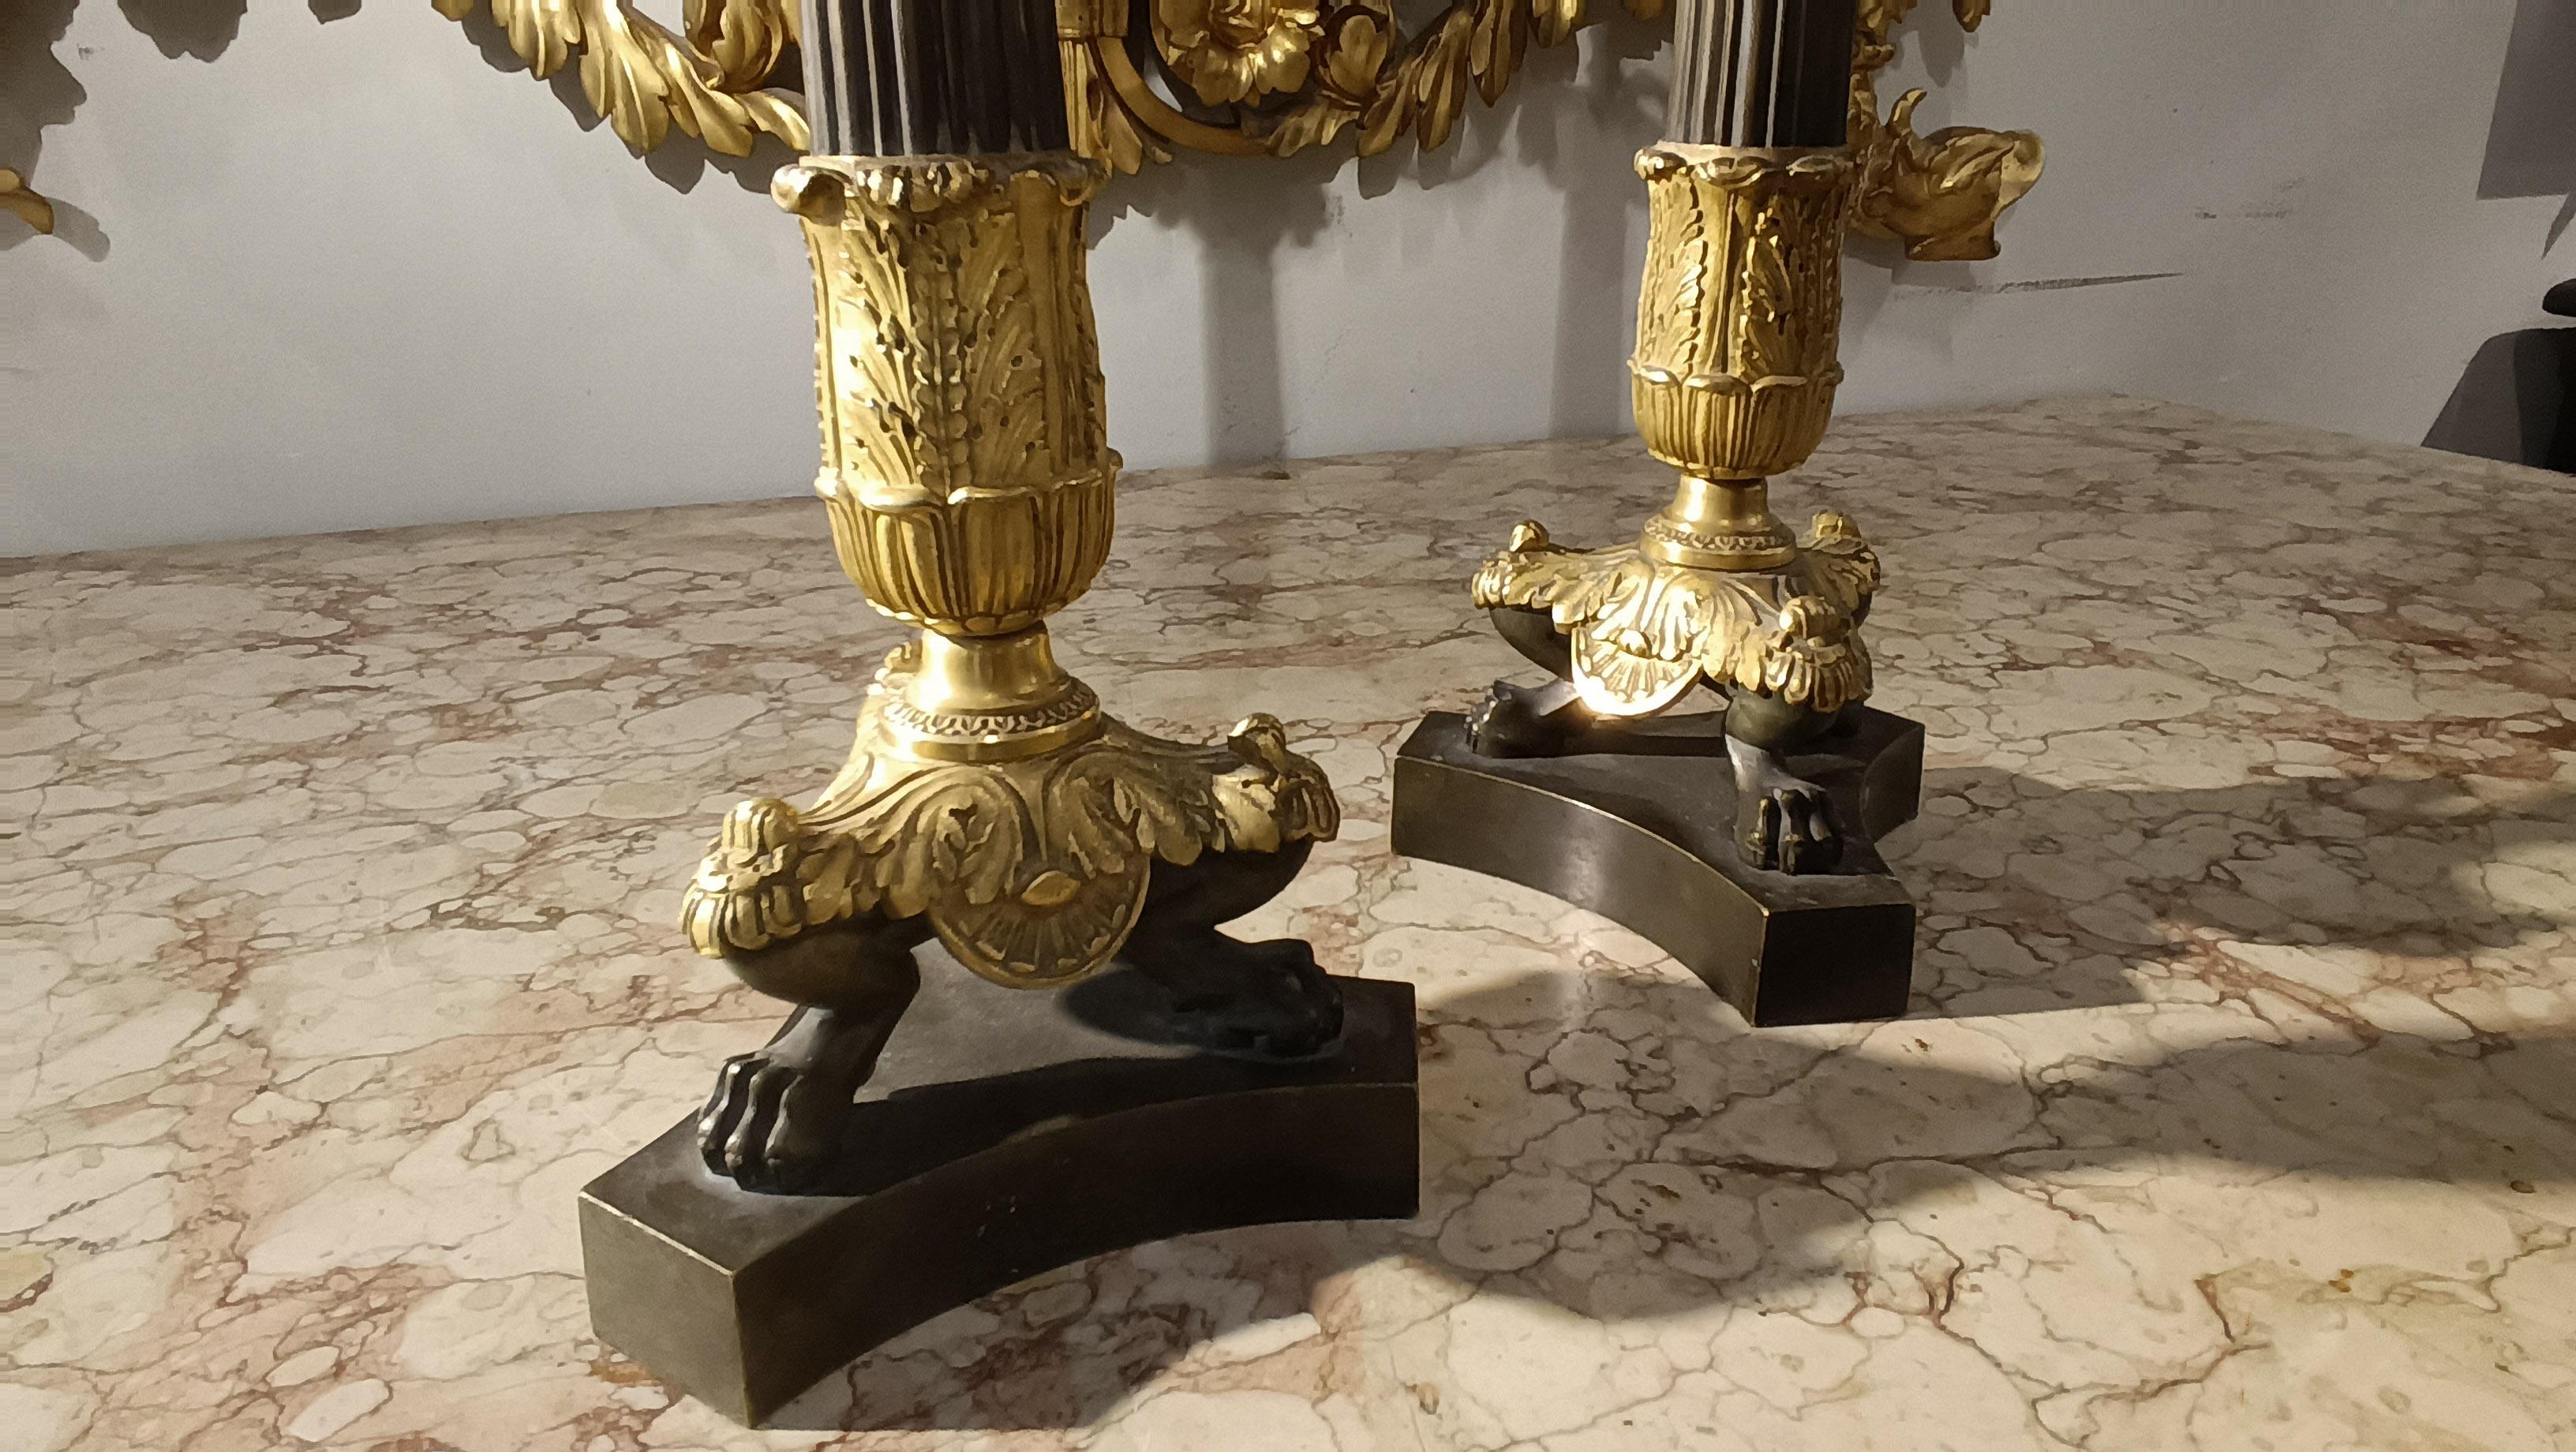 EARLY 19th CENTURY PAIR OF CARLO X BRONZE CANDLESTICKS For Sale 1